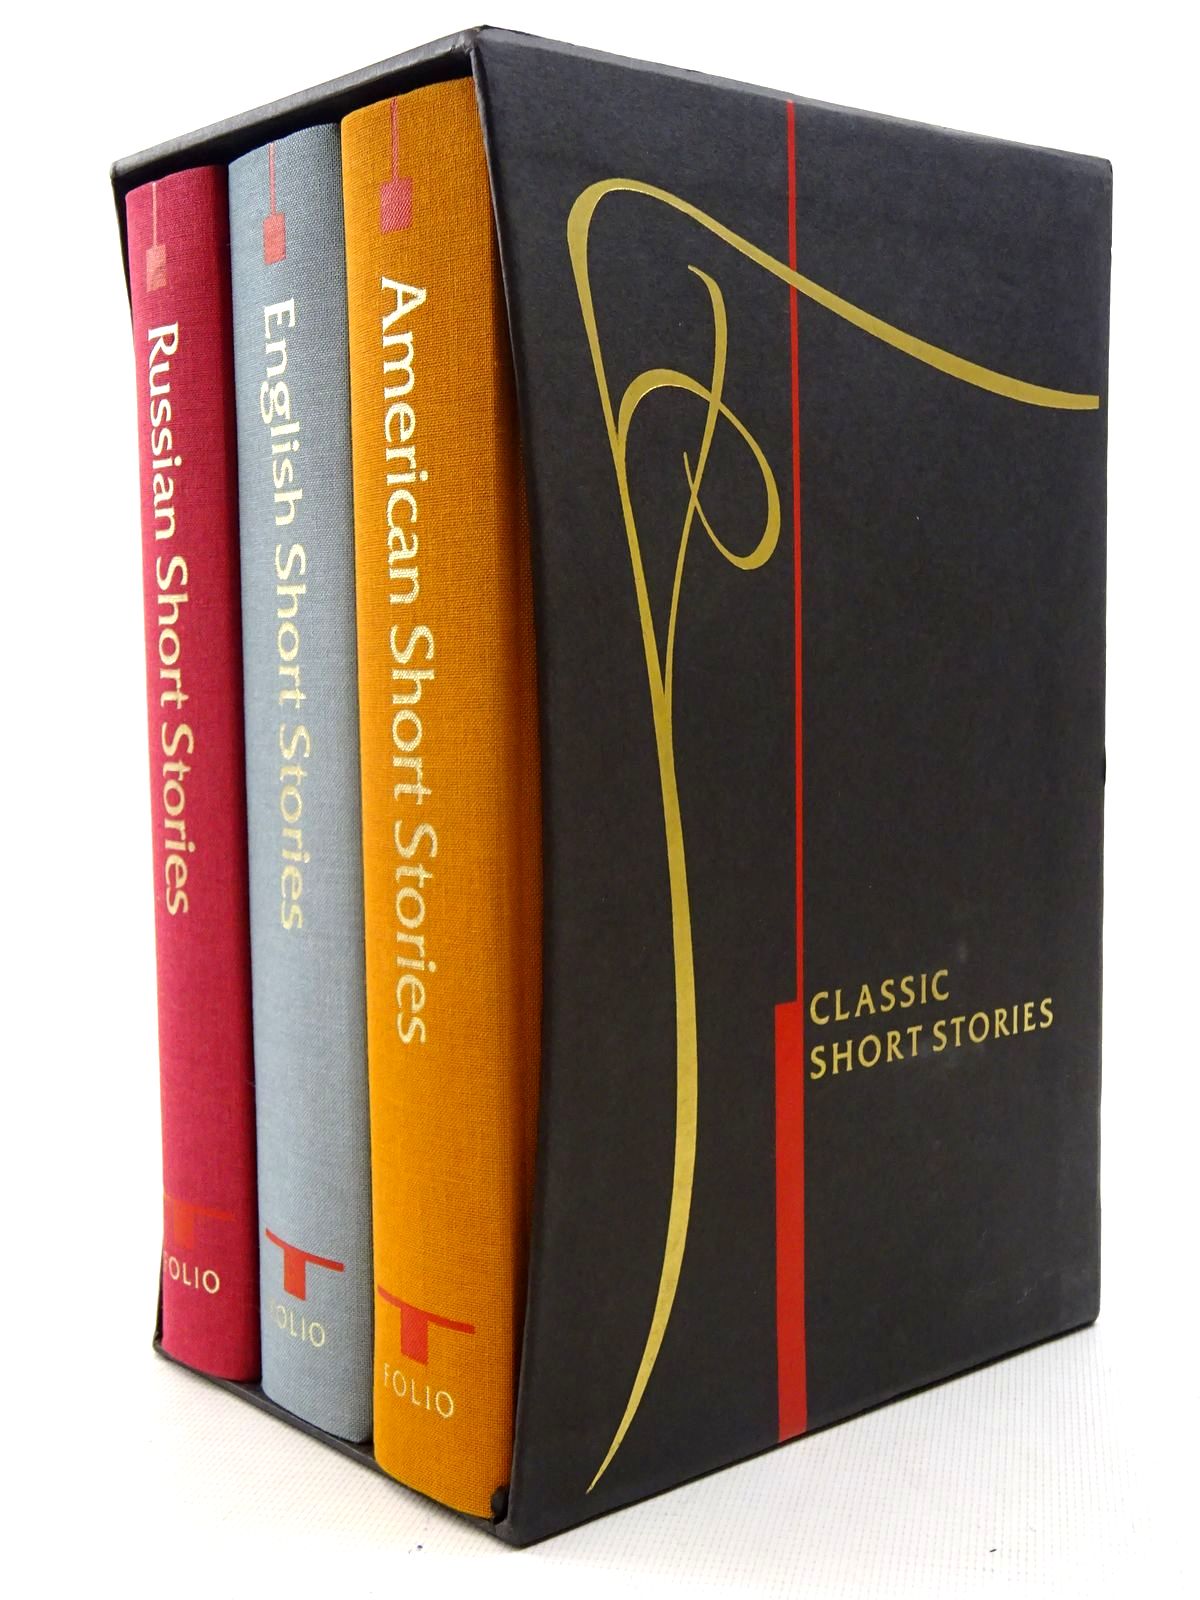 Classic Short Stories (3 Volumes) English, Russian & American